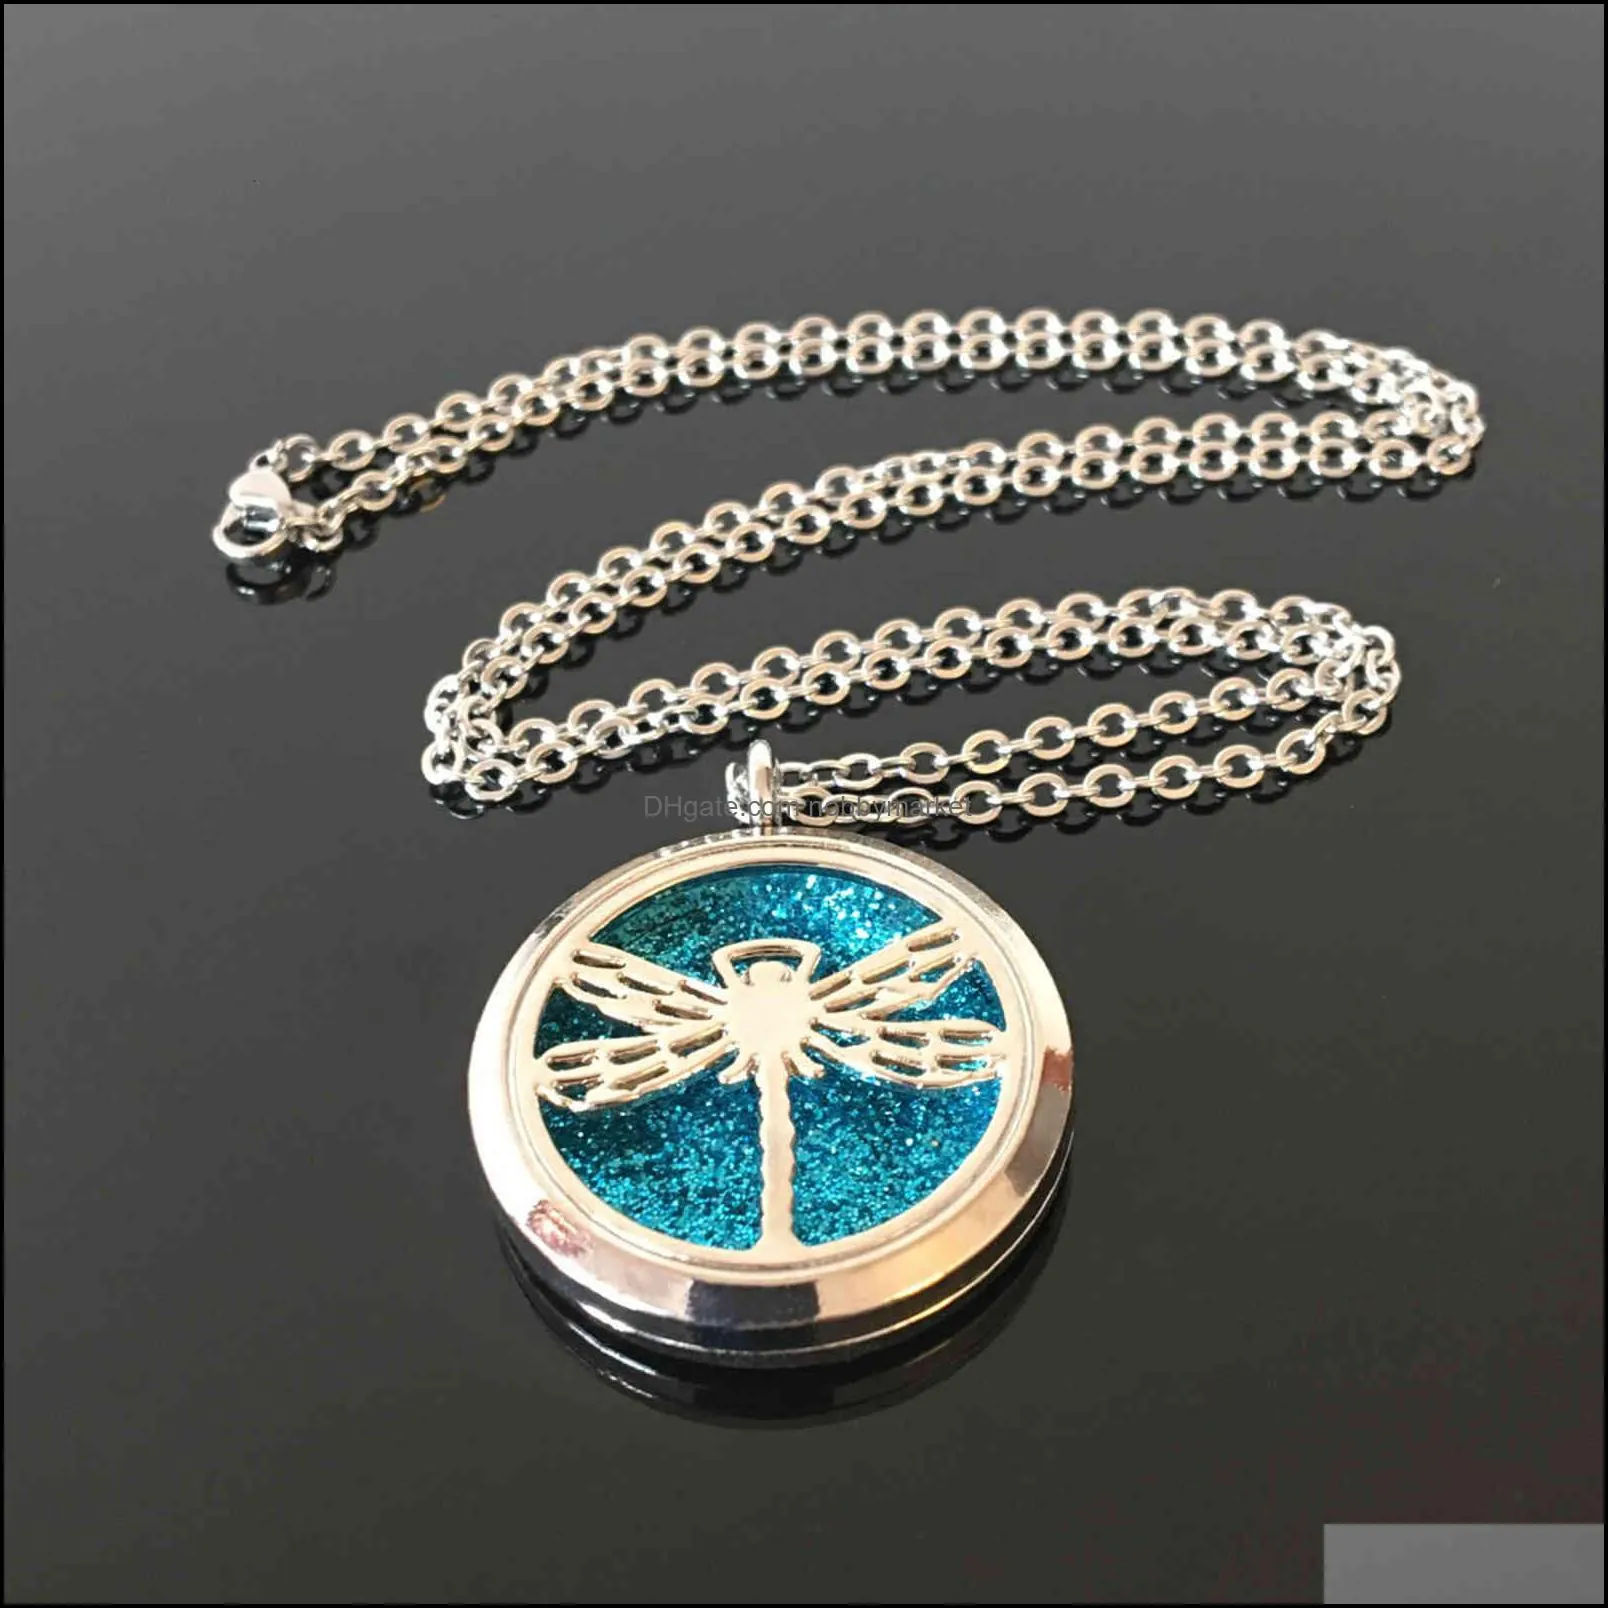 Factory Outlet Brand Necklace Locket Essential Oil Diffuser Fashion Stainless Steel Aromatherapy Therapy Tree of Life Flower Animal